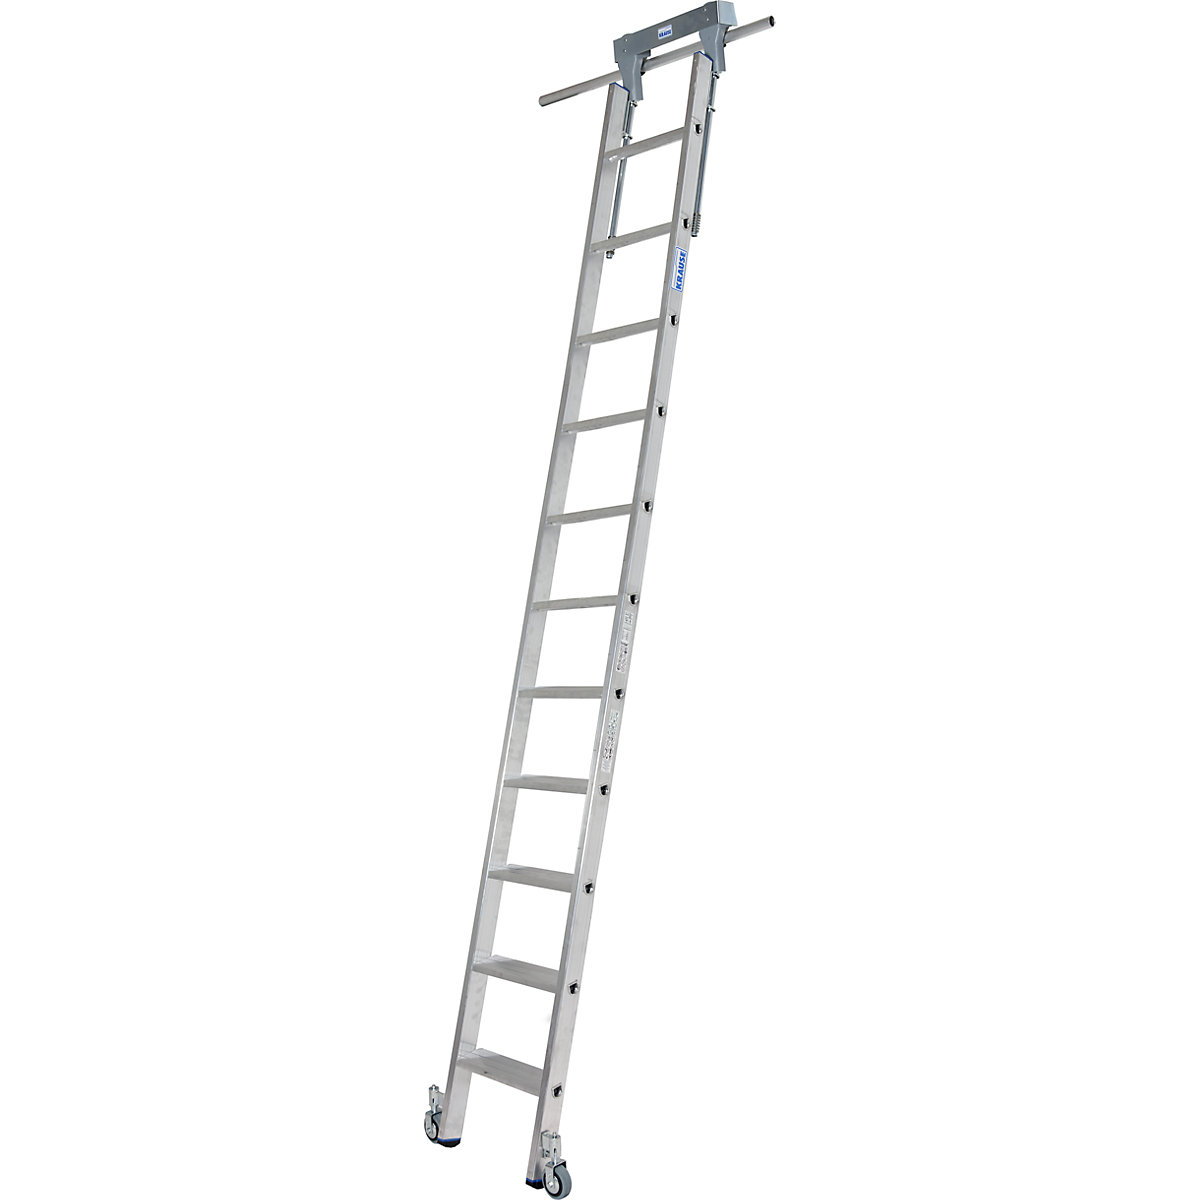 KRAUSE – Step shelf ladder, with wheels on top for round tubing rail system, 11 steps